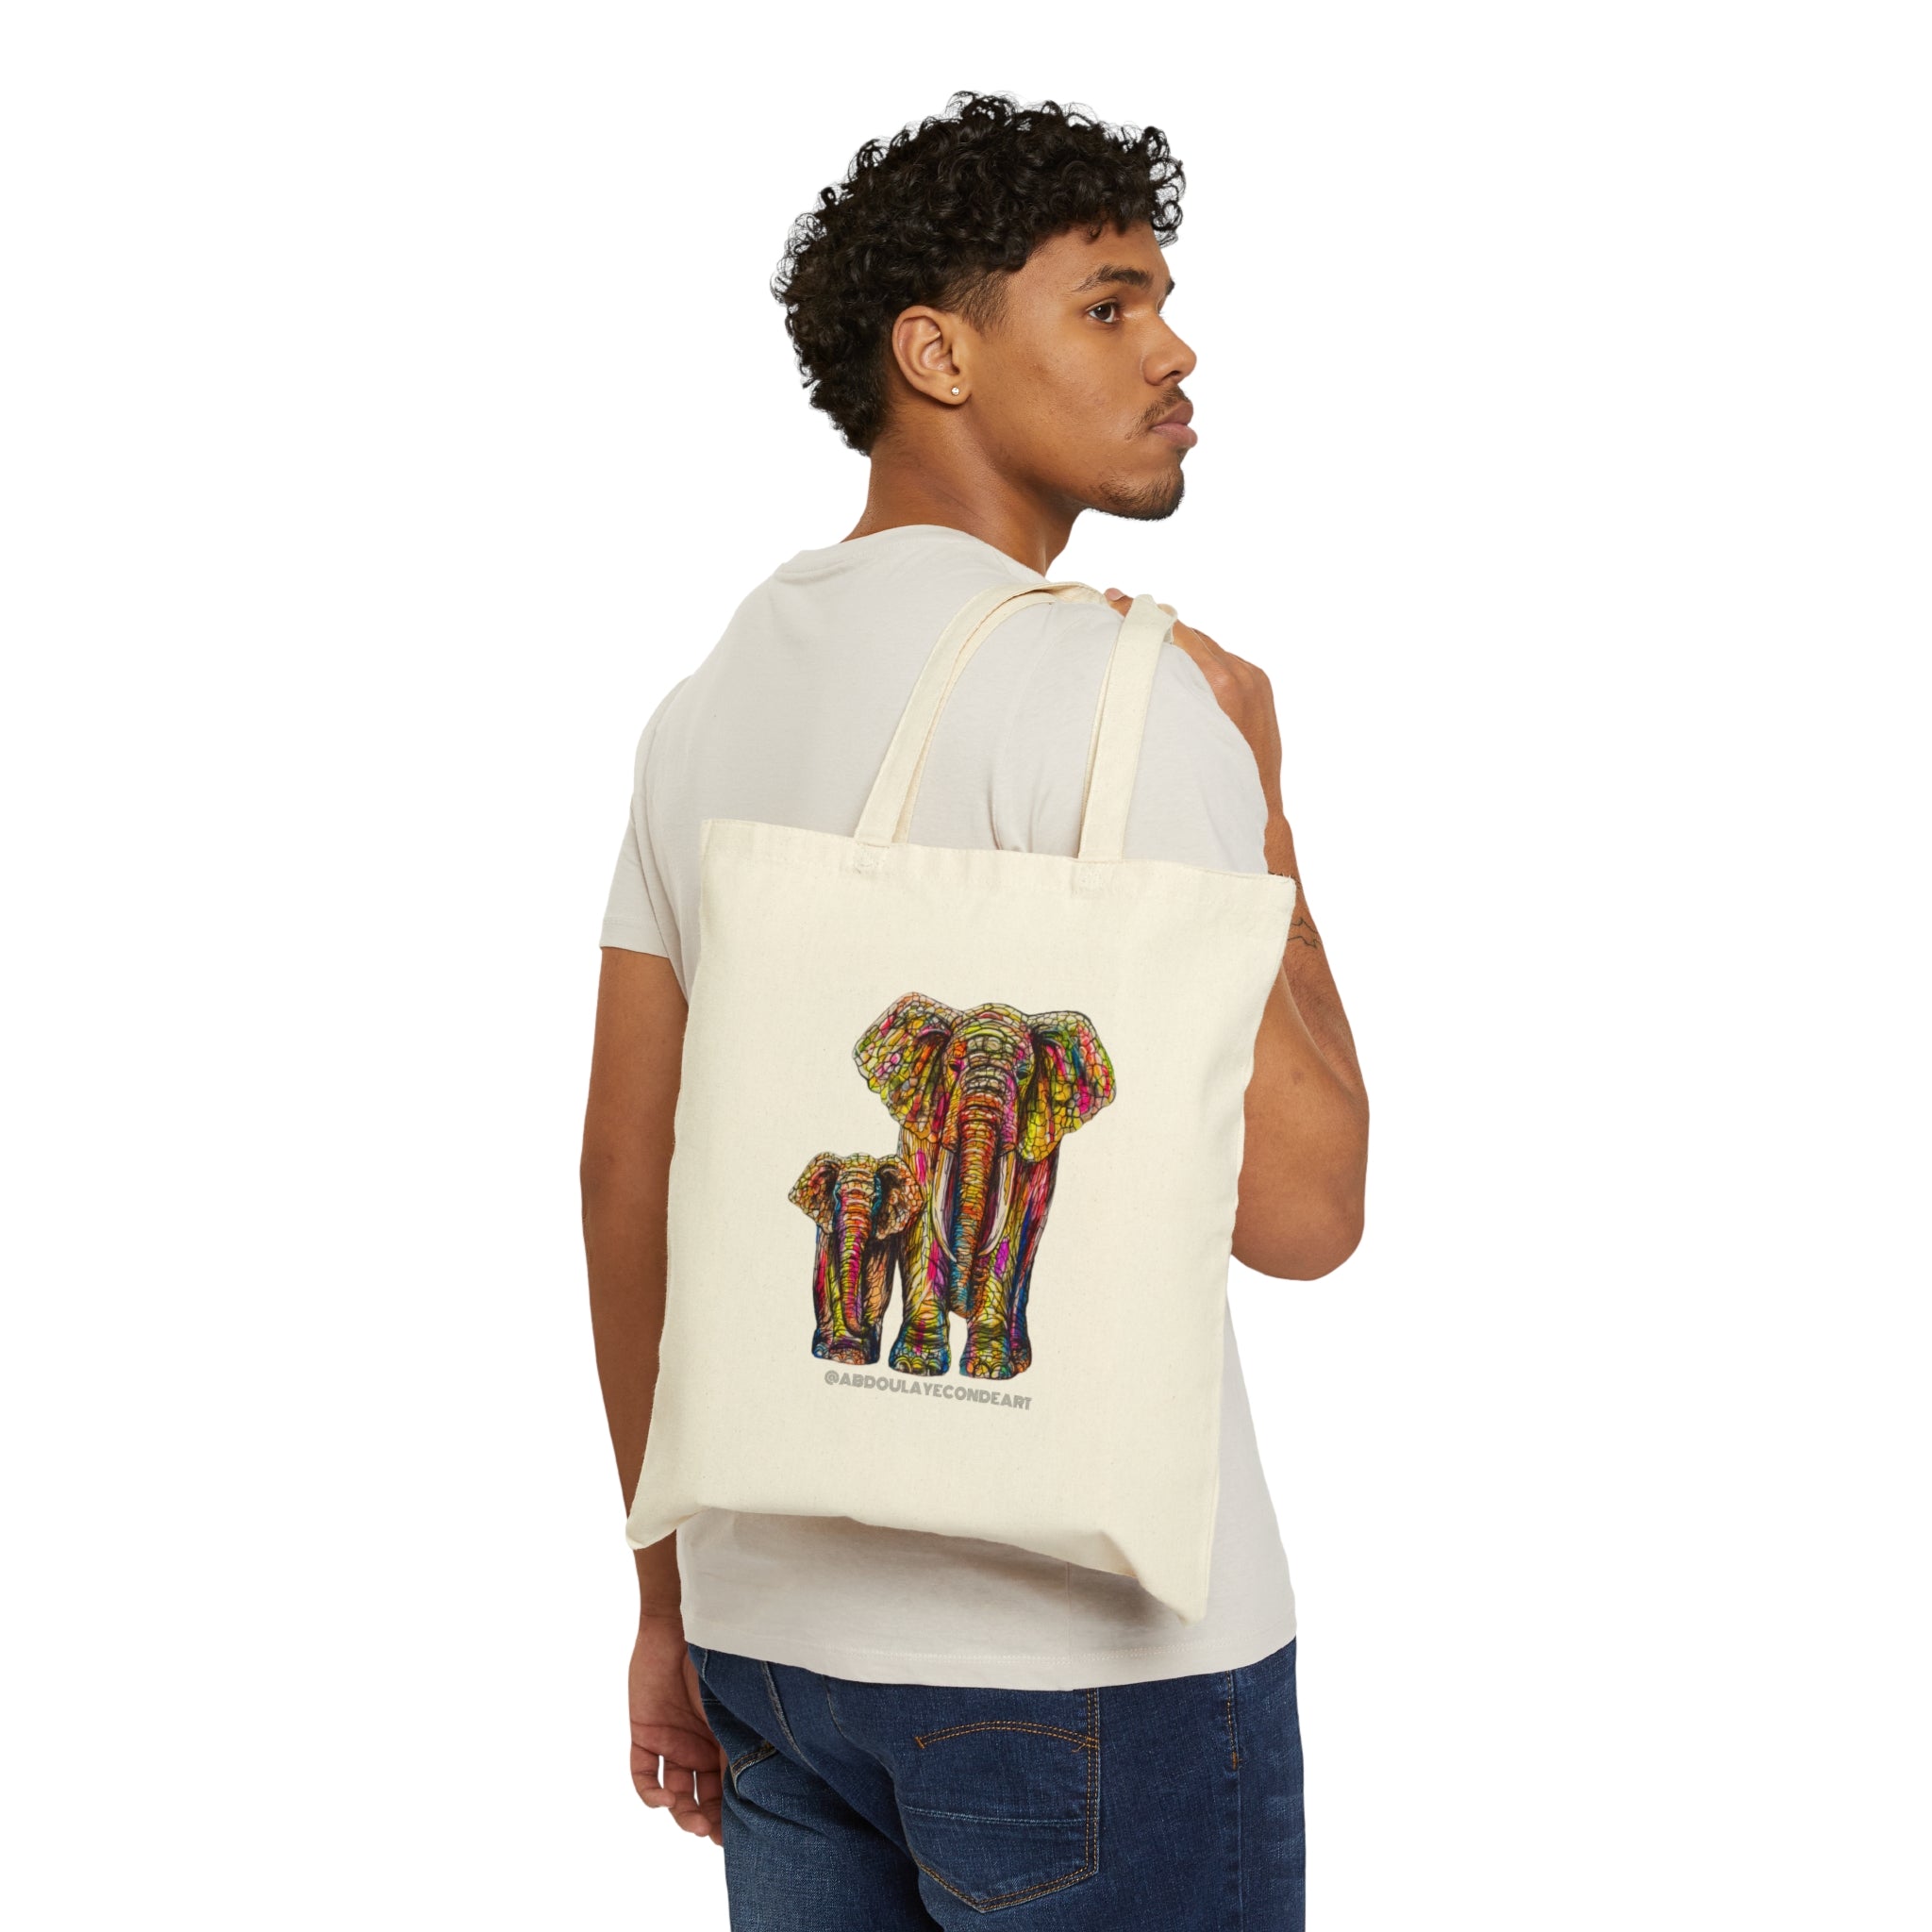 Through It All Tote